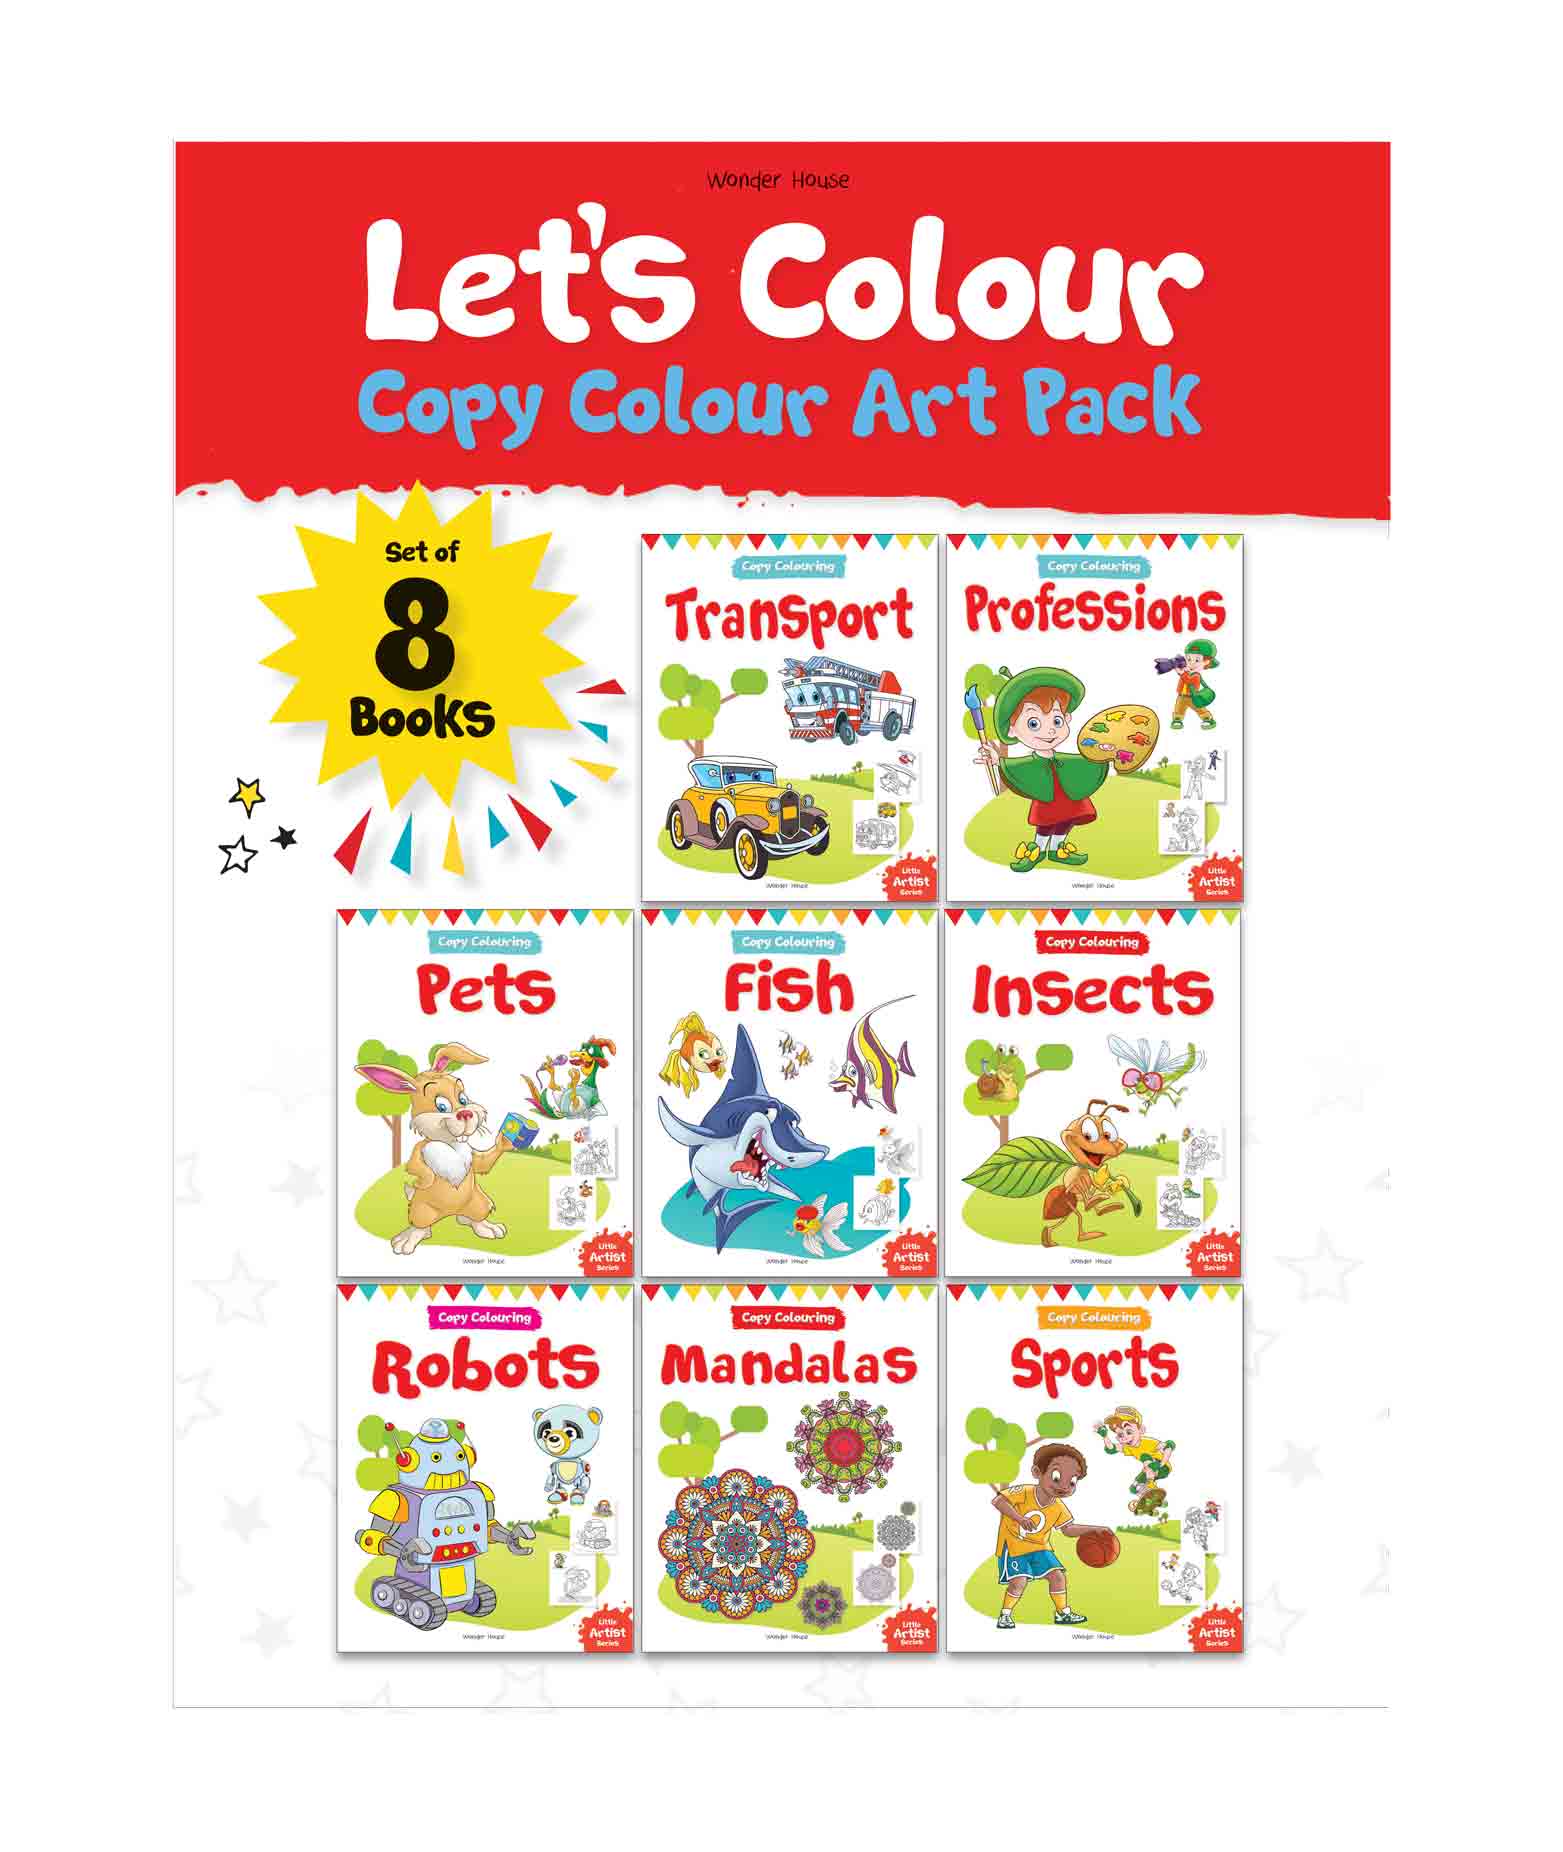 Let's Colour Copy Colouring Boxset : Pack of 8 Books (Transport, Professions, Pets, Fish, Insects, Robots, Mandalas and Sports)